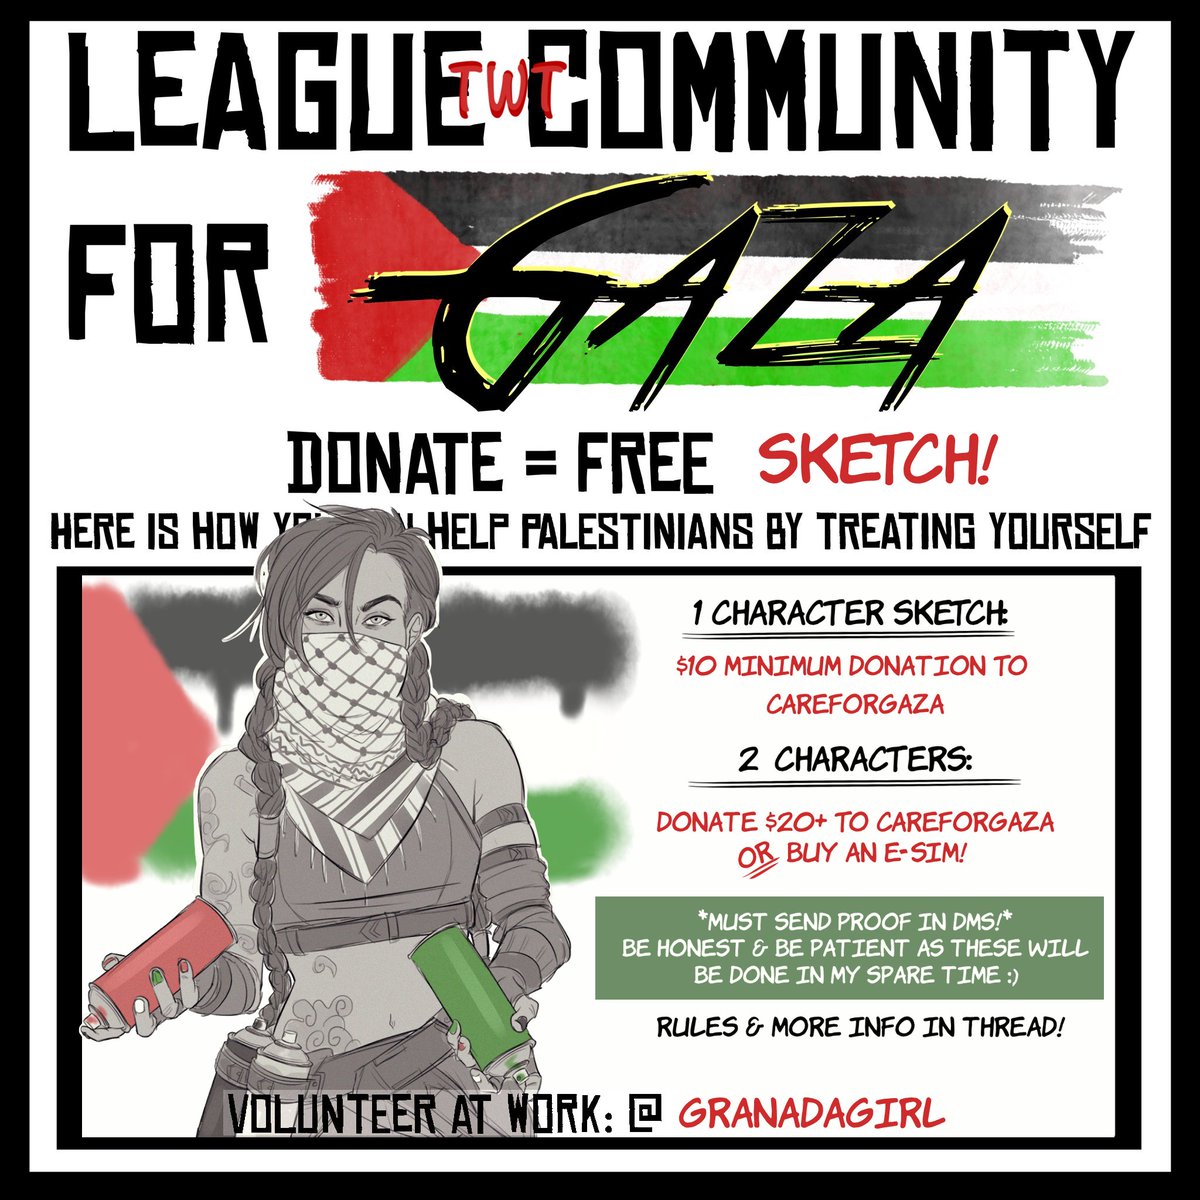 I'm joining #LeagueTwt4Gaza ! ♥️🖤🤍💚🇵🇸 Make a charitable donātion & receive a sketch from me! Or any of the other amazing artists participating! Huge thank you to @SuccubaRossa for creating this! 🥰